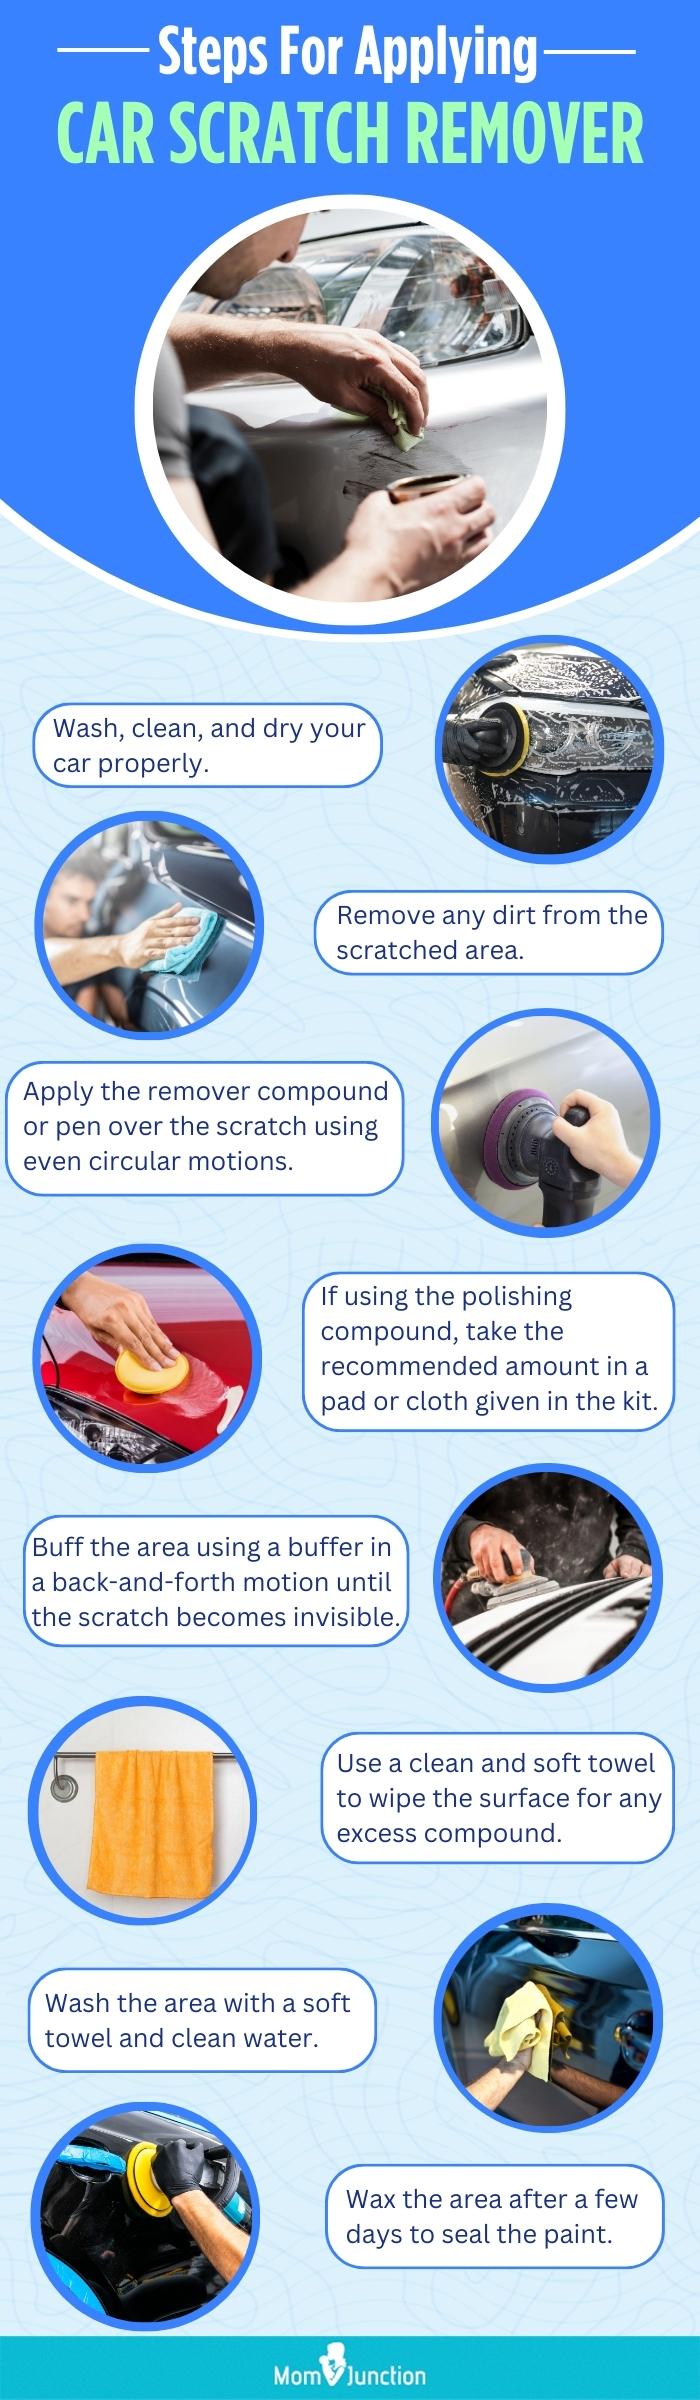 Steps For Applying Car Scratch Remover (infographic)